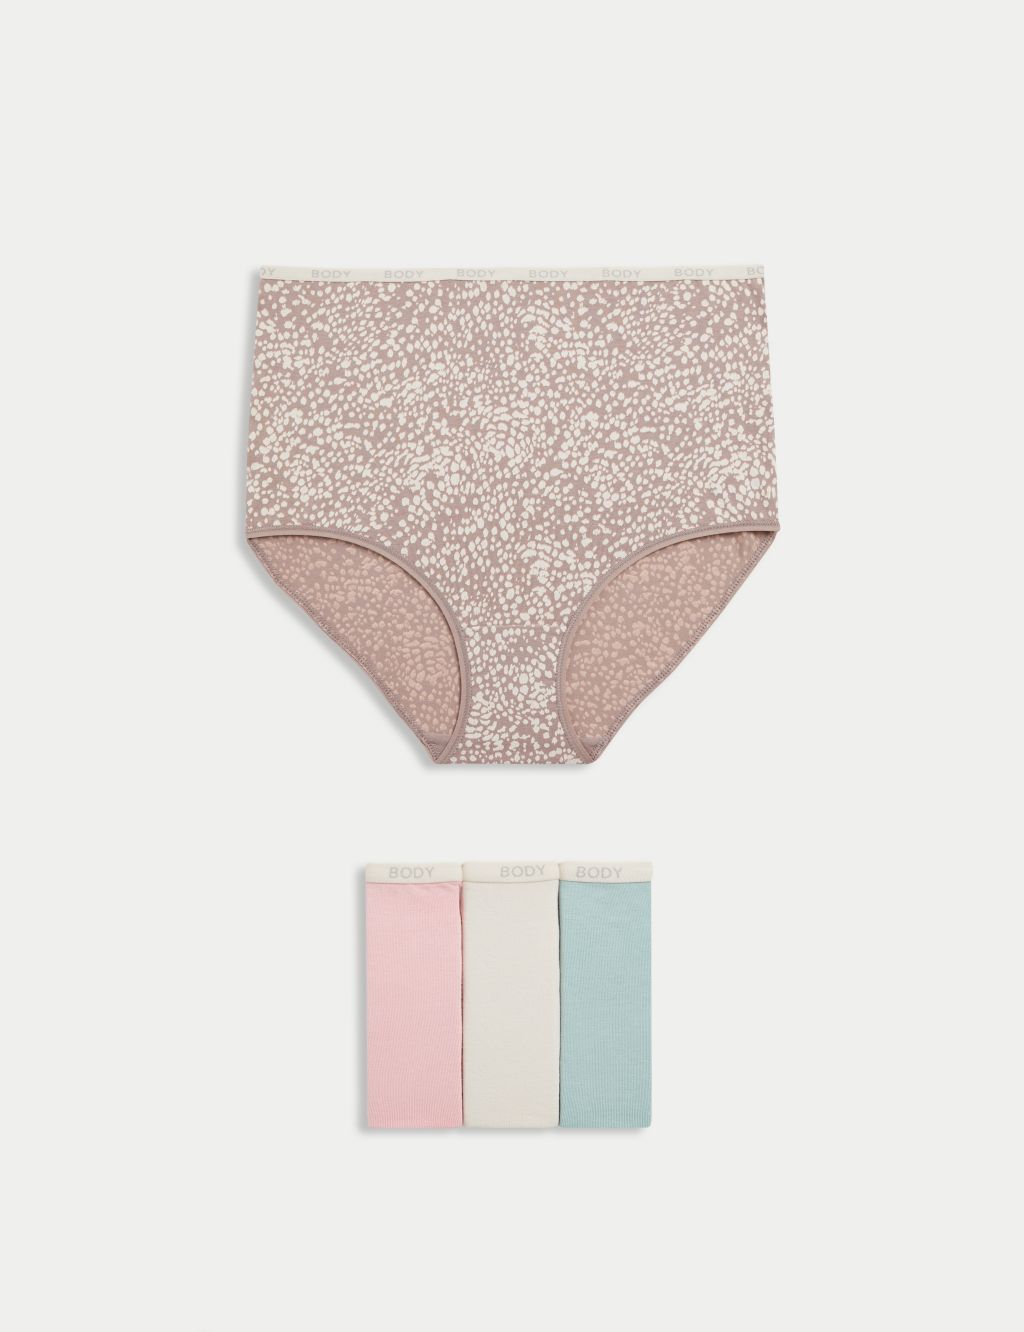 2 women's briefs in Nude Pink and Taupe Body Move